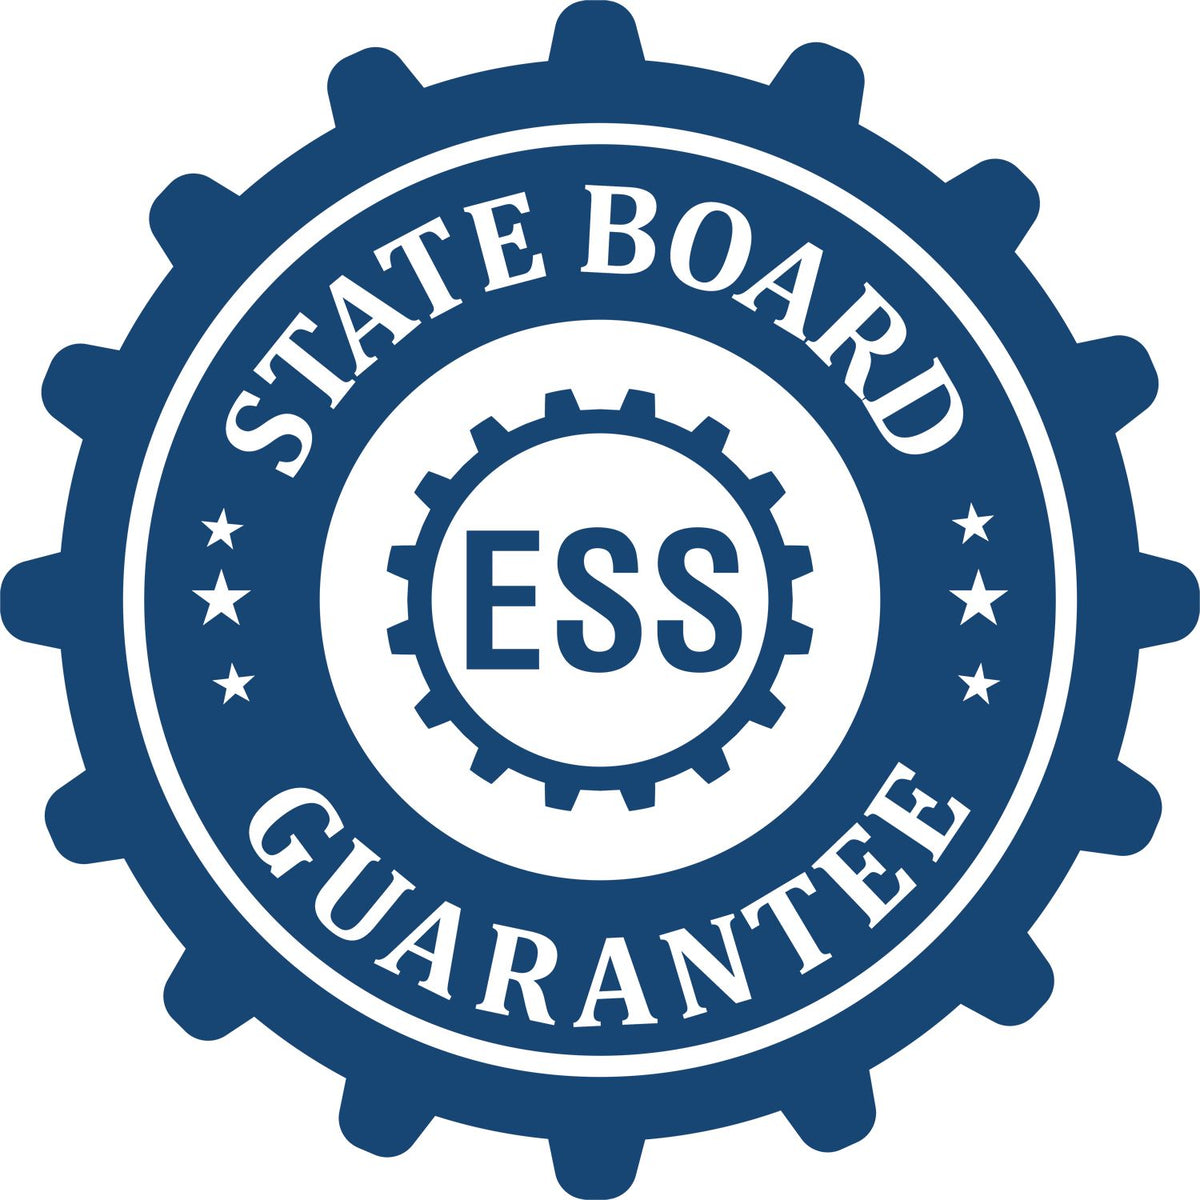 An emblem in a gear shape illustrating a state board guarantee for the Digital Missouri Landscape Architect Stamp product.